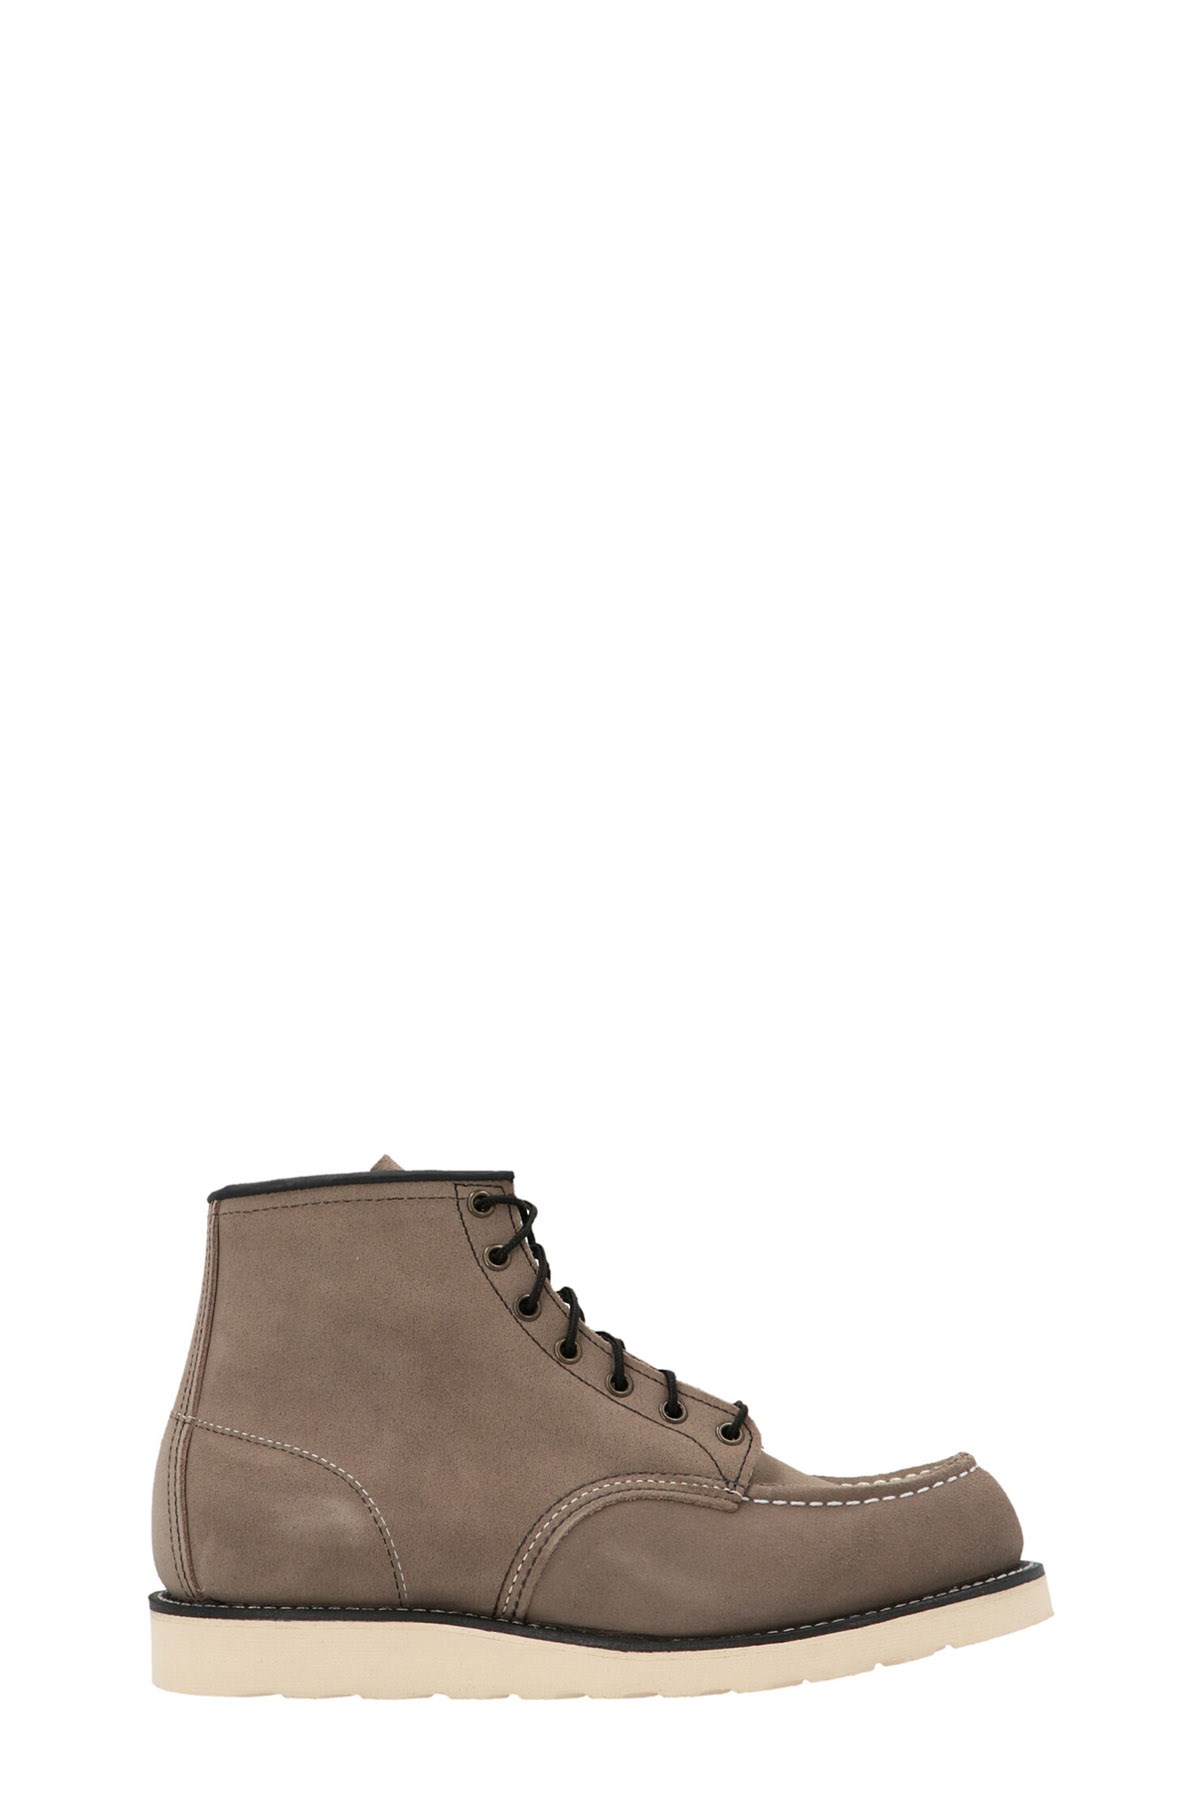 RED WING SHOES 'Heritage 6 Inch Moc Toe’ Boots